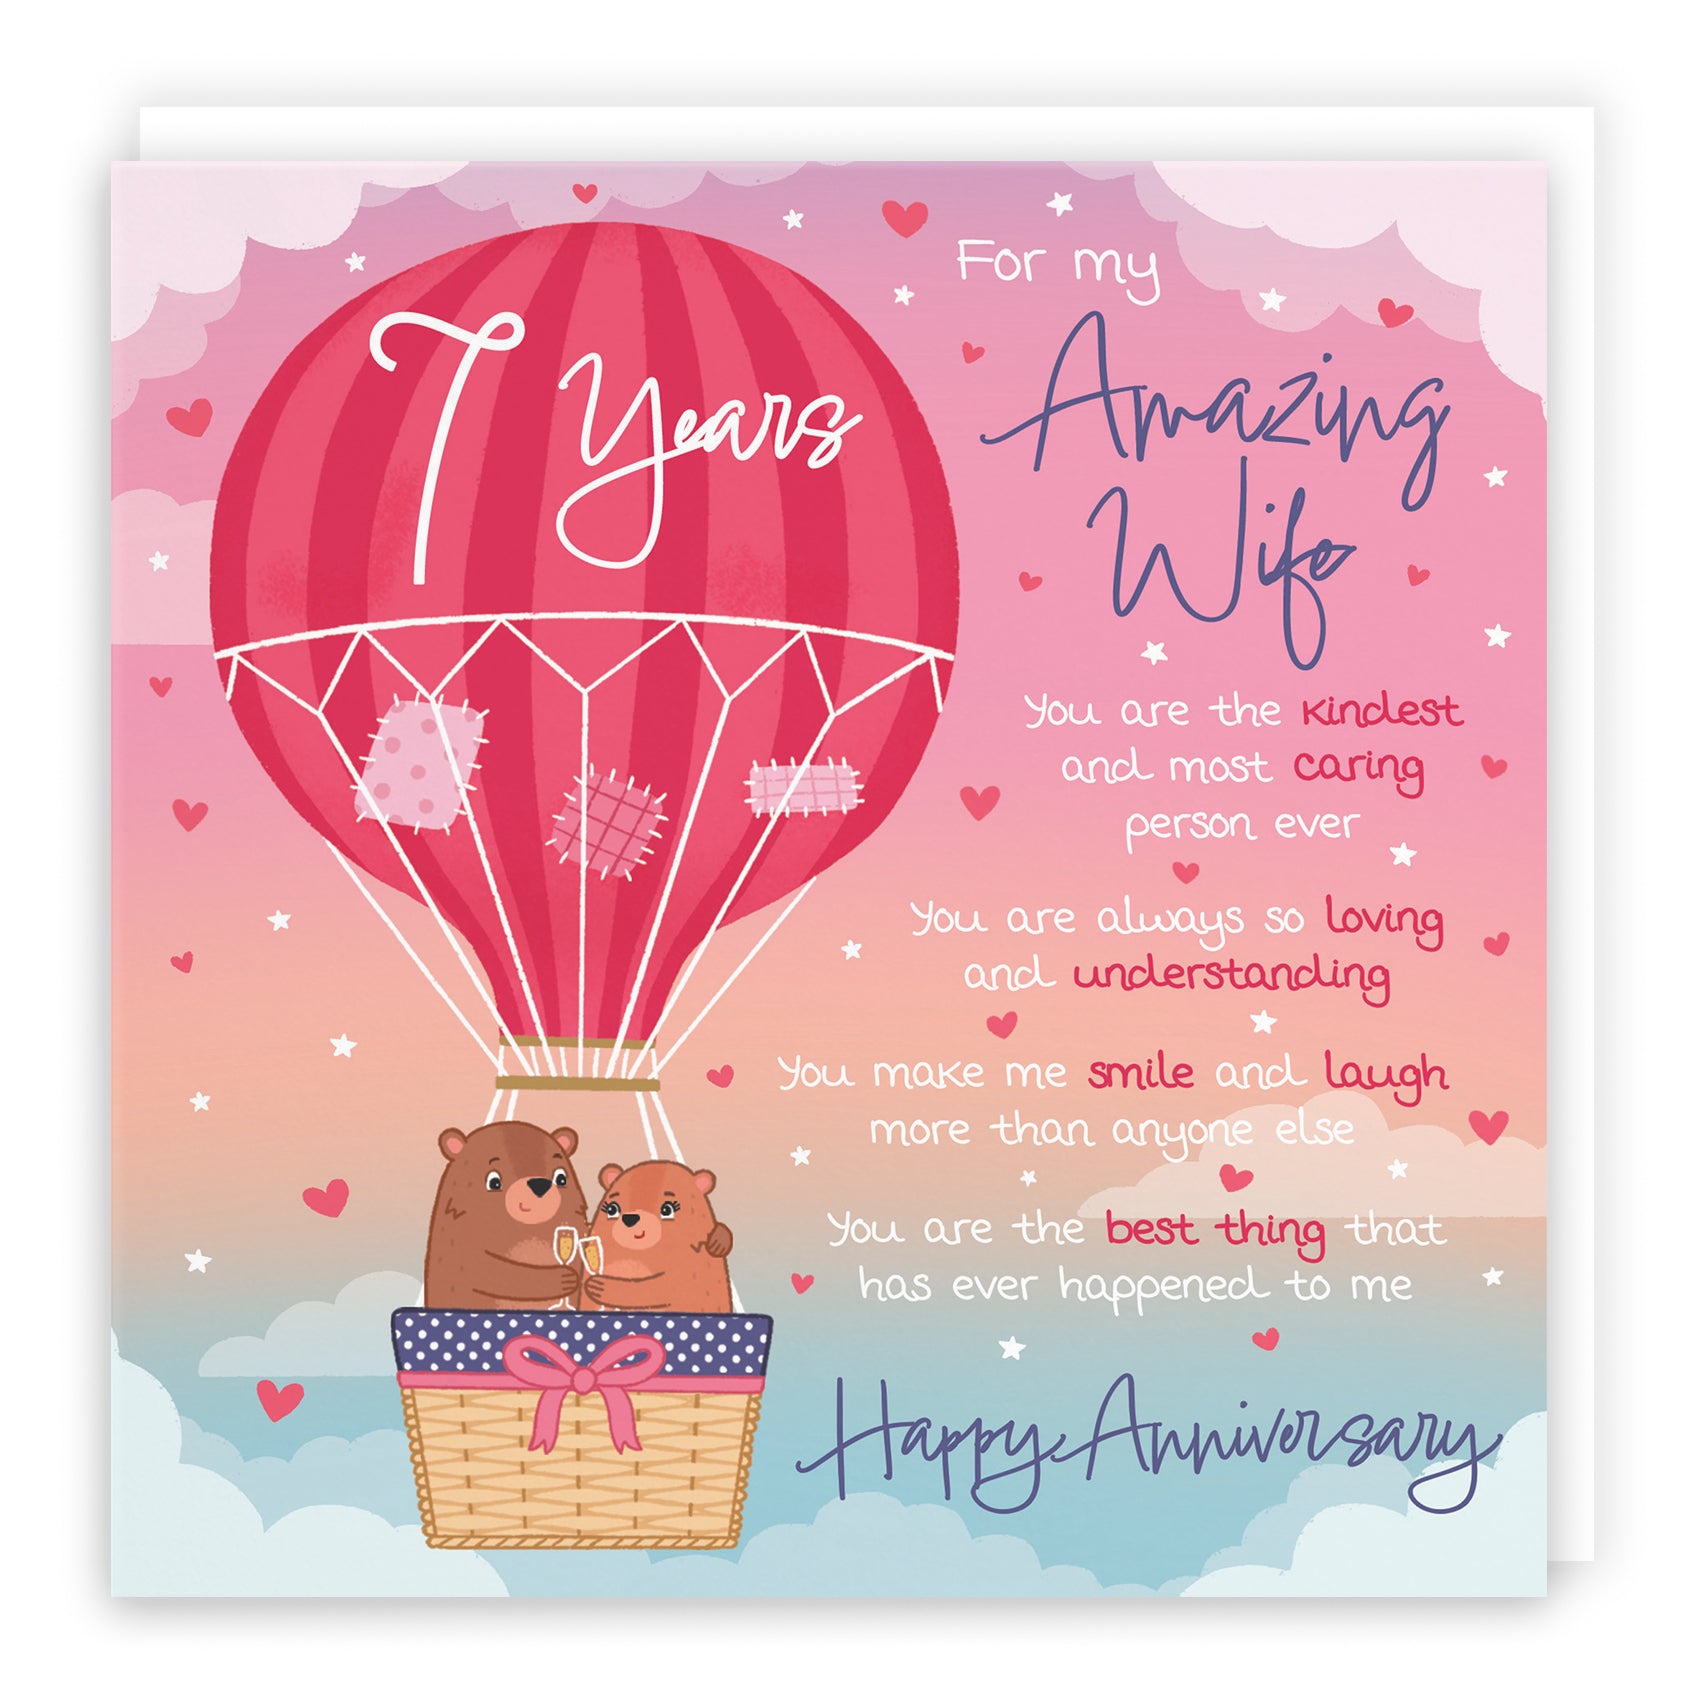 Wife 7th Anniversary Poem Card Love Is In The Air Cute Bears